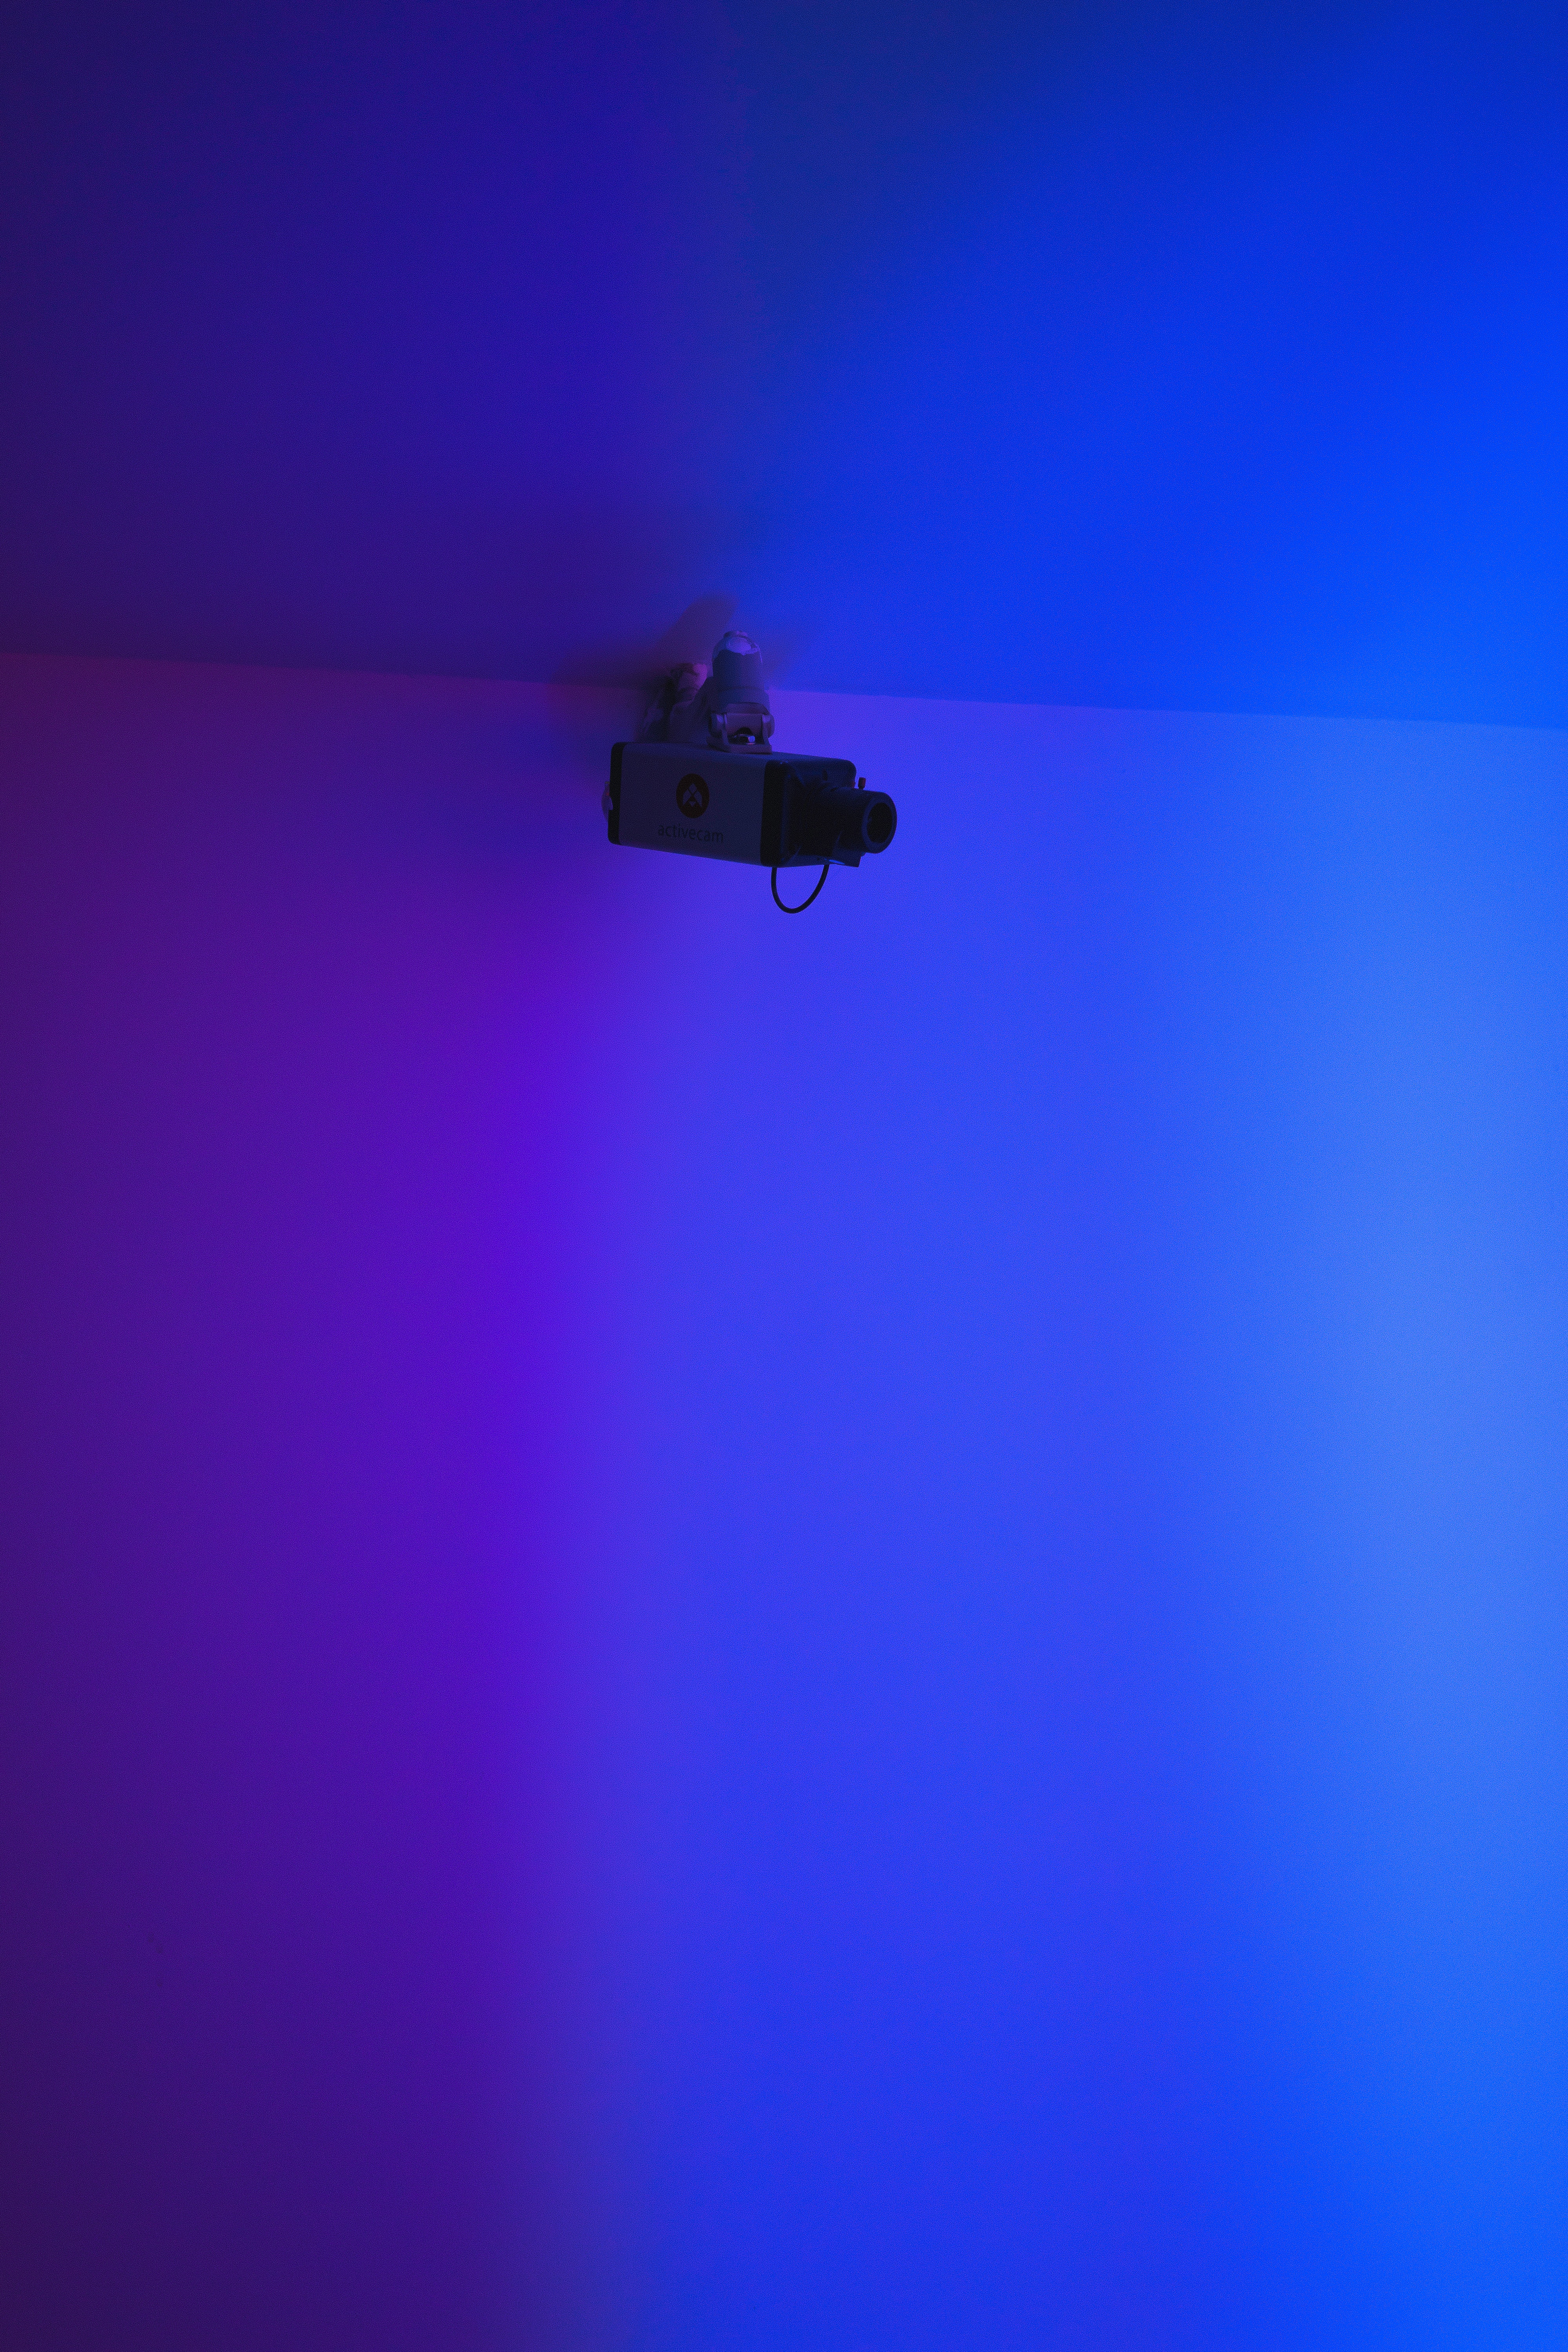 Box Security Camera on blue background